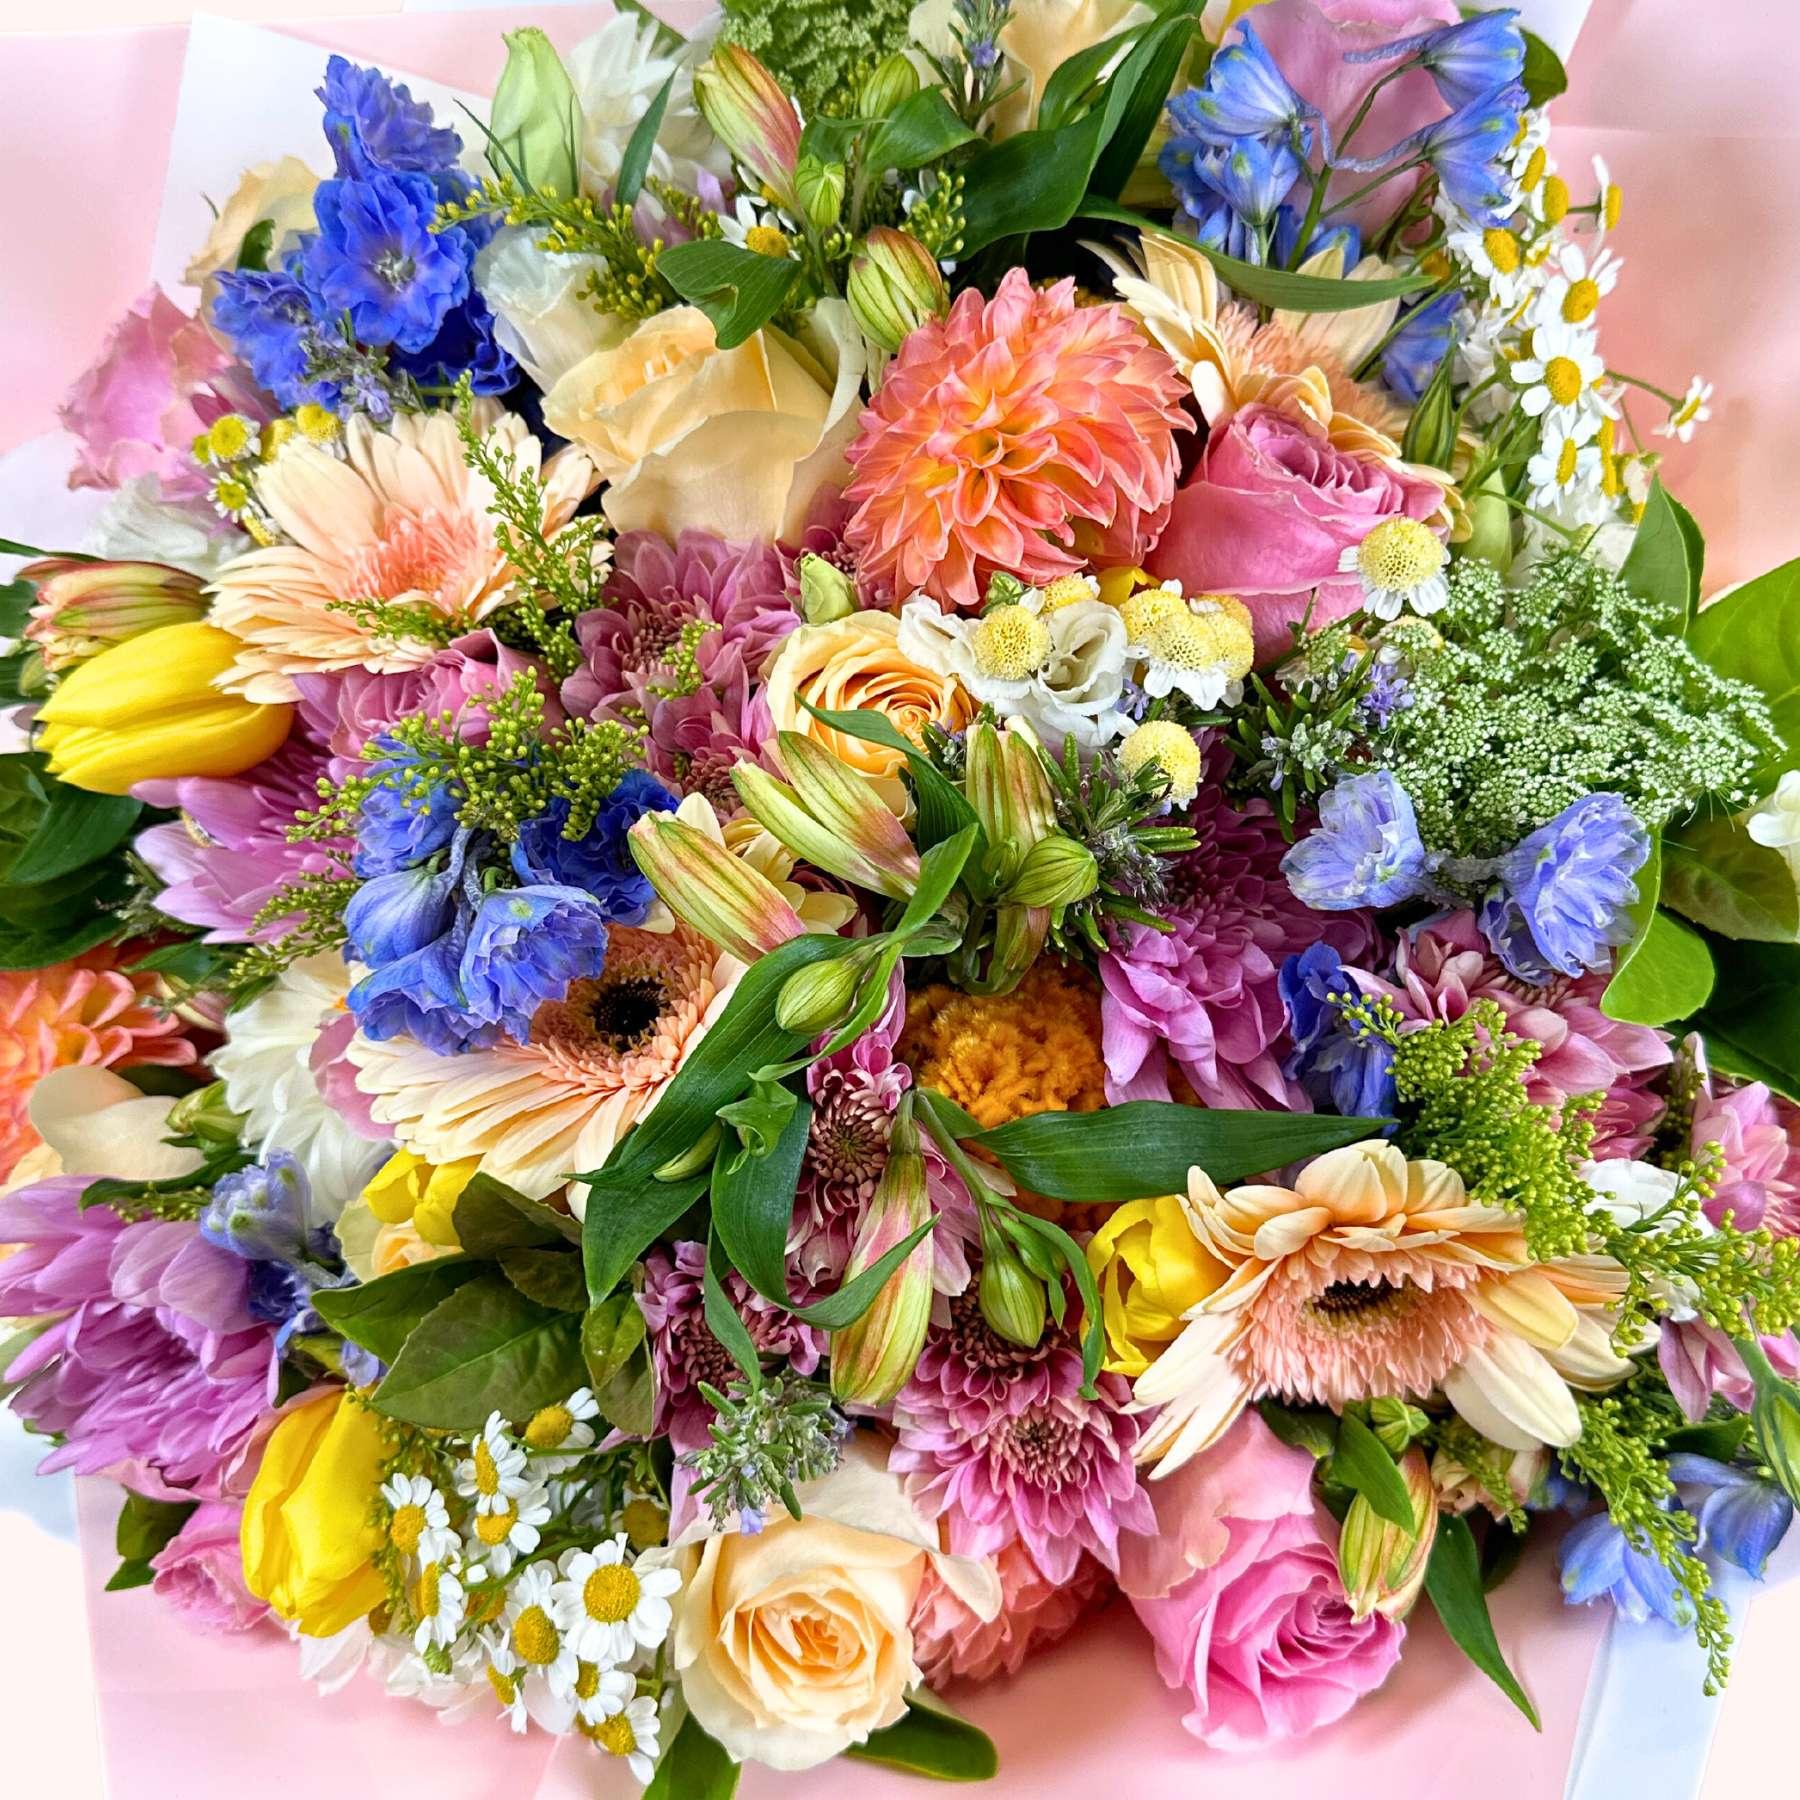 The Pink Passion Flower Bouquet, a vibrant and lush flower bouquet of pink, blue, yellow, and cream flowers with rich green foliage, embodying a spectrum of freshness and beauty, crafted by Fabulous Flowers and Gifts.